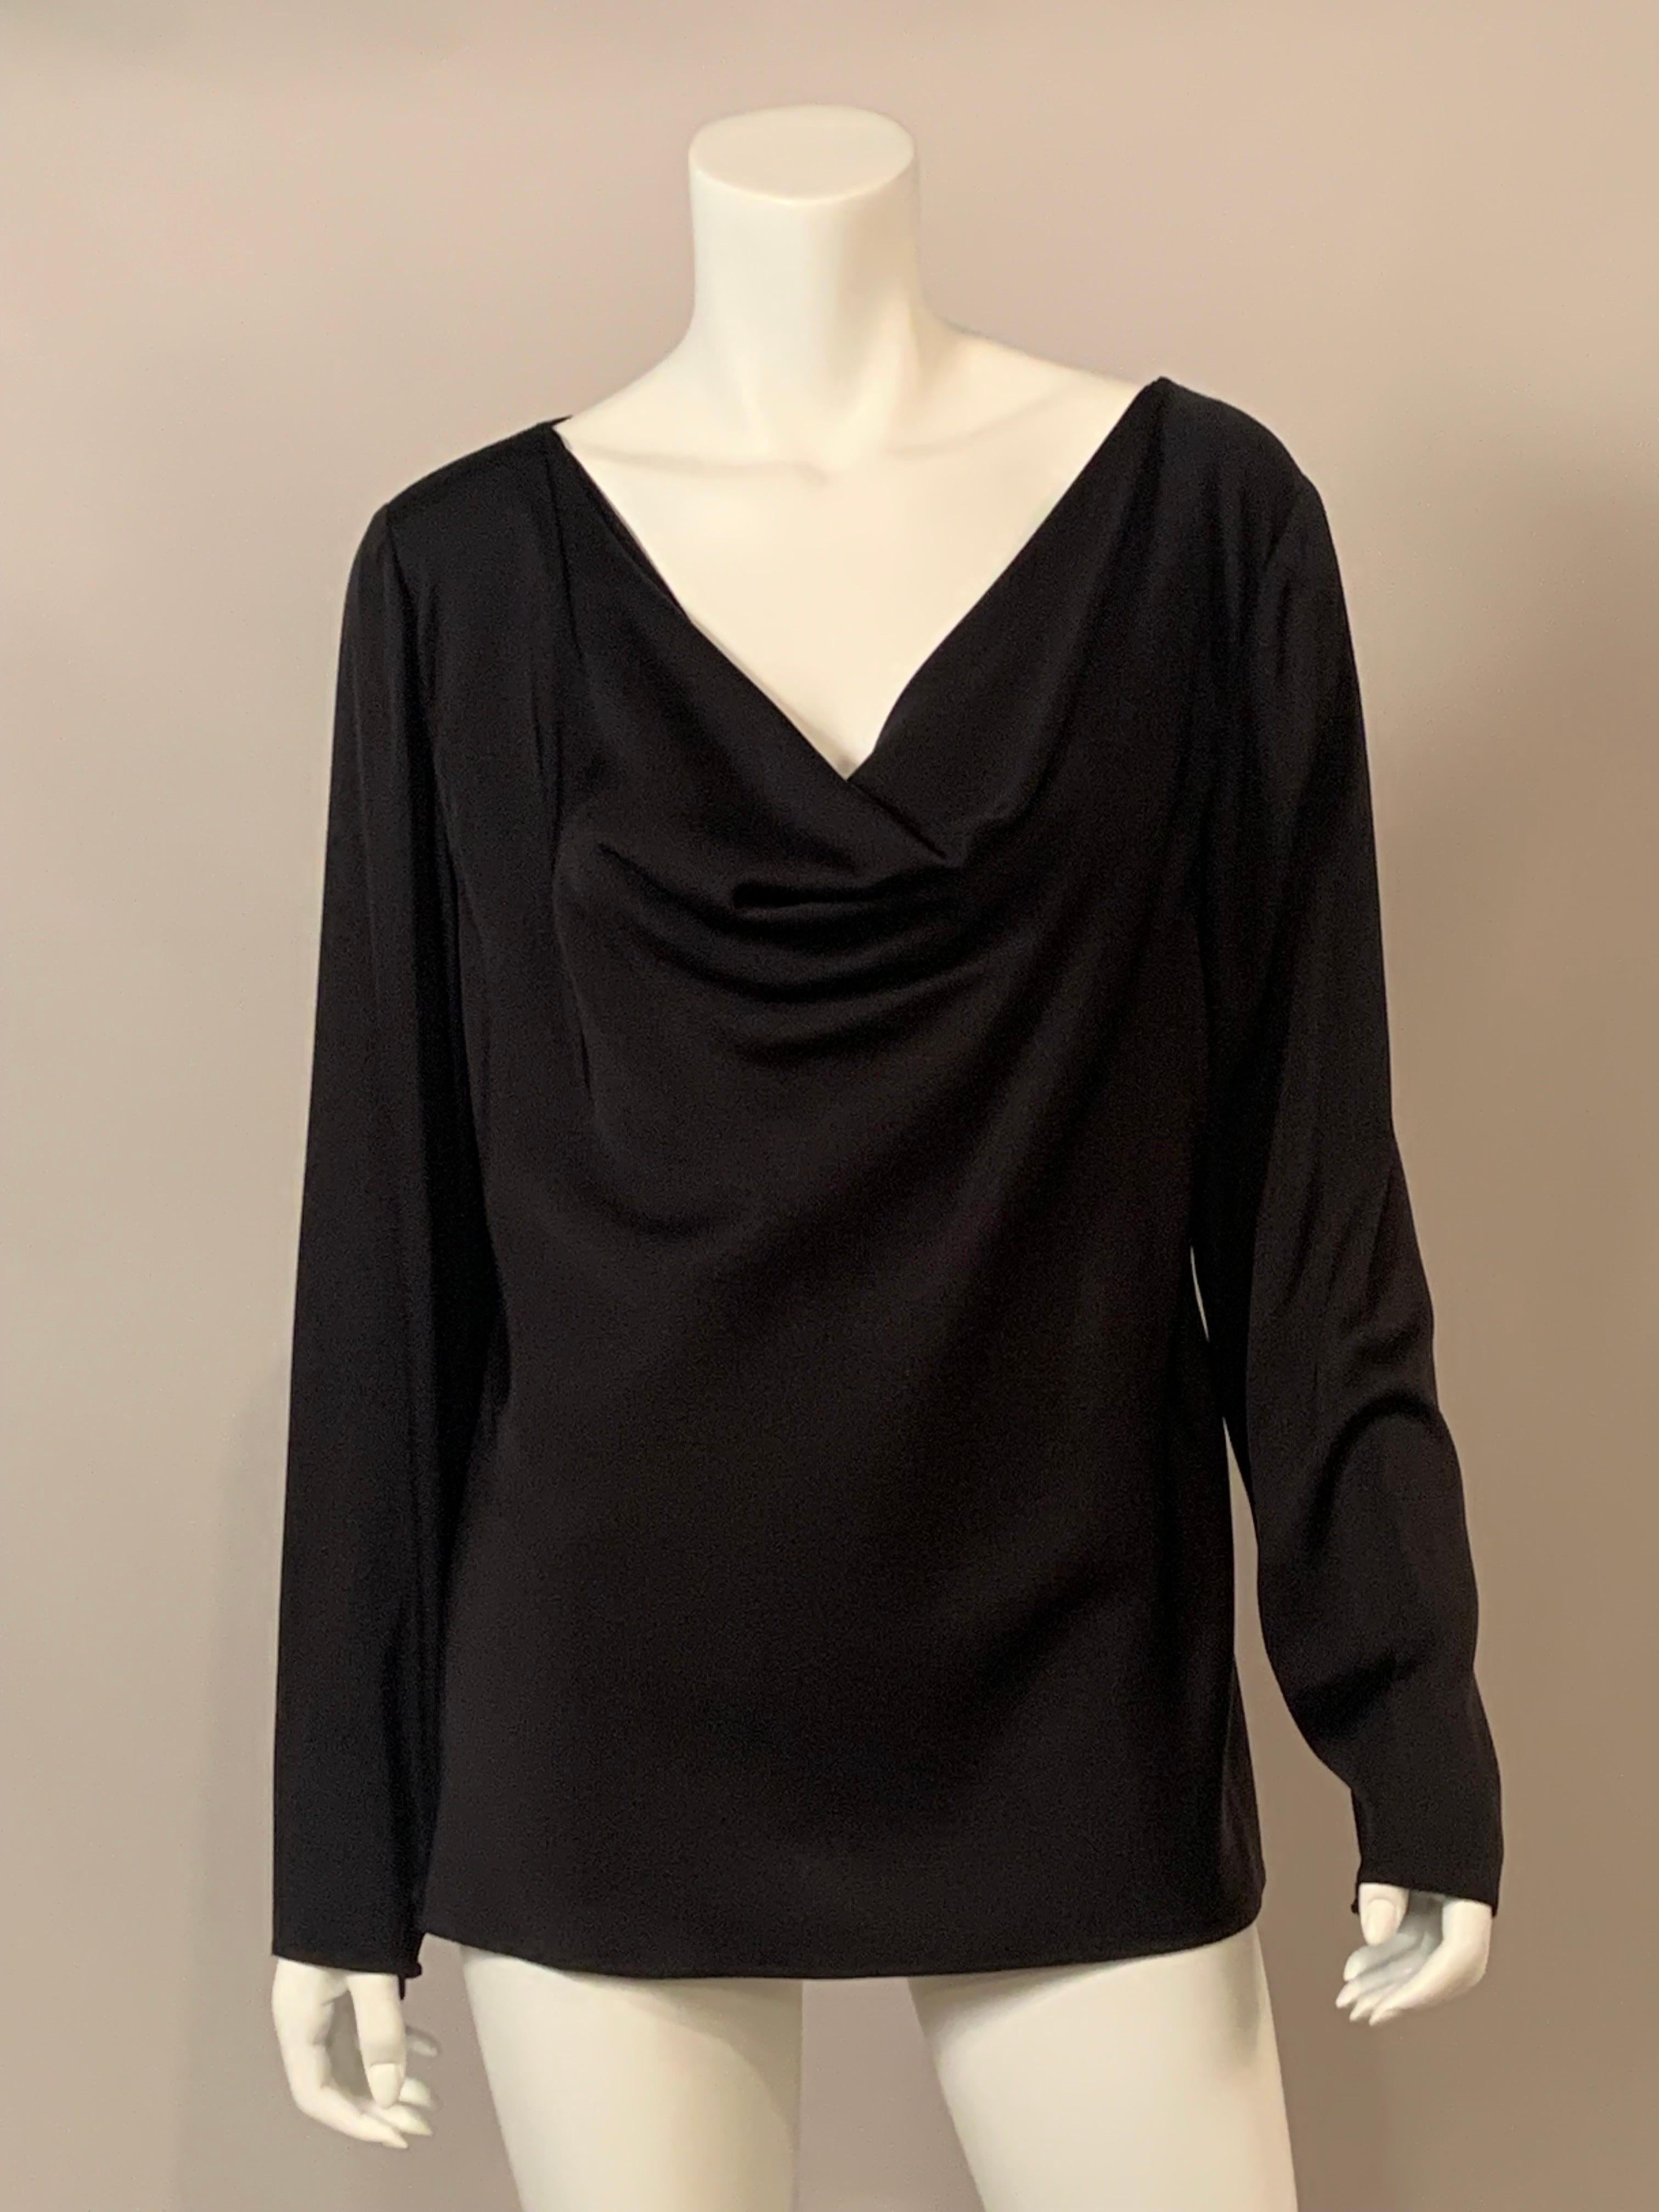 An elegant black silk tunic from Giorgio Armani has a draped and weighted neckline which adds elegance and polish to this black top. The long sleeves have invisible zippers at the wrists.  It is marked a 1980's size 16 which is a contemporary size